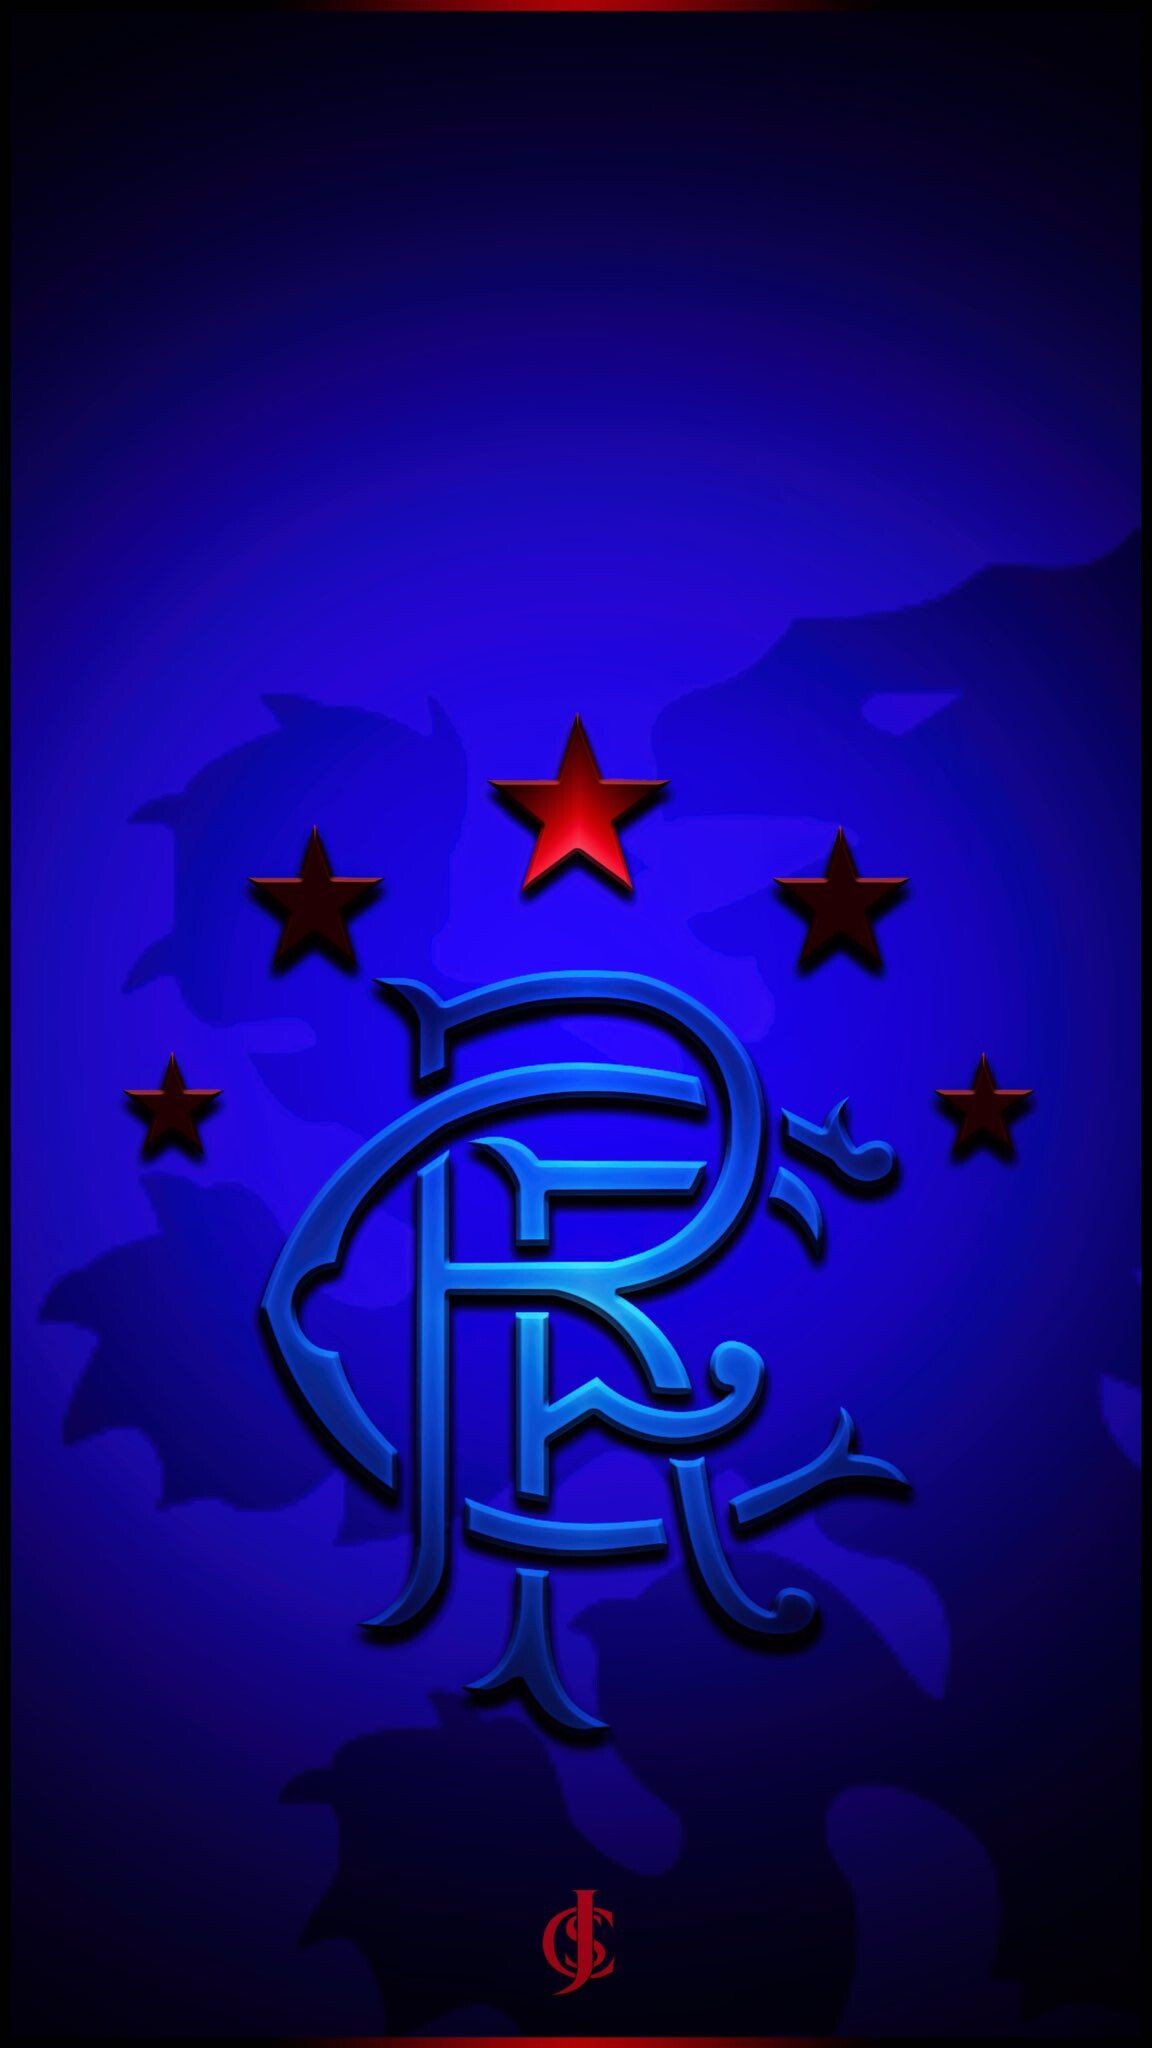 Rangers F.C.: Winners of the European Cup Winners' Cup in 1972, The Scottish Premiership. 1160x2050 HD Background.